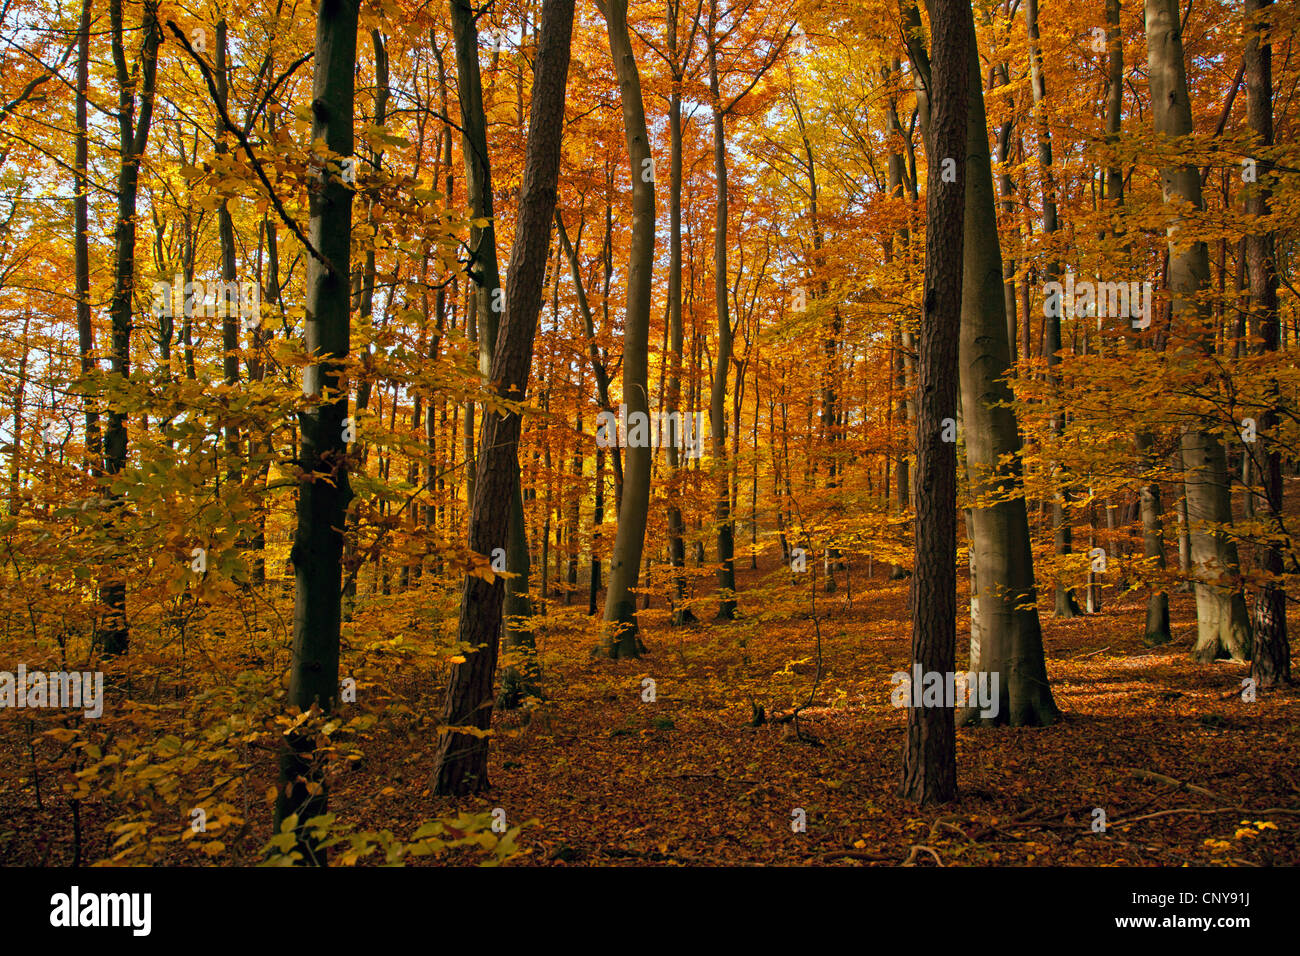 common beech (Fagus sylvatica), beech forest in autumn, Germany, Bavaria Stock Photo